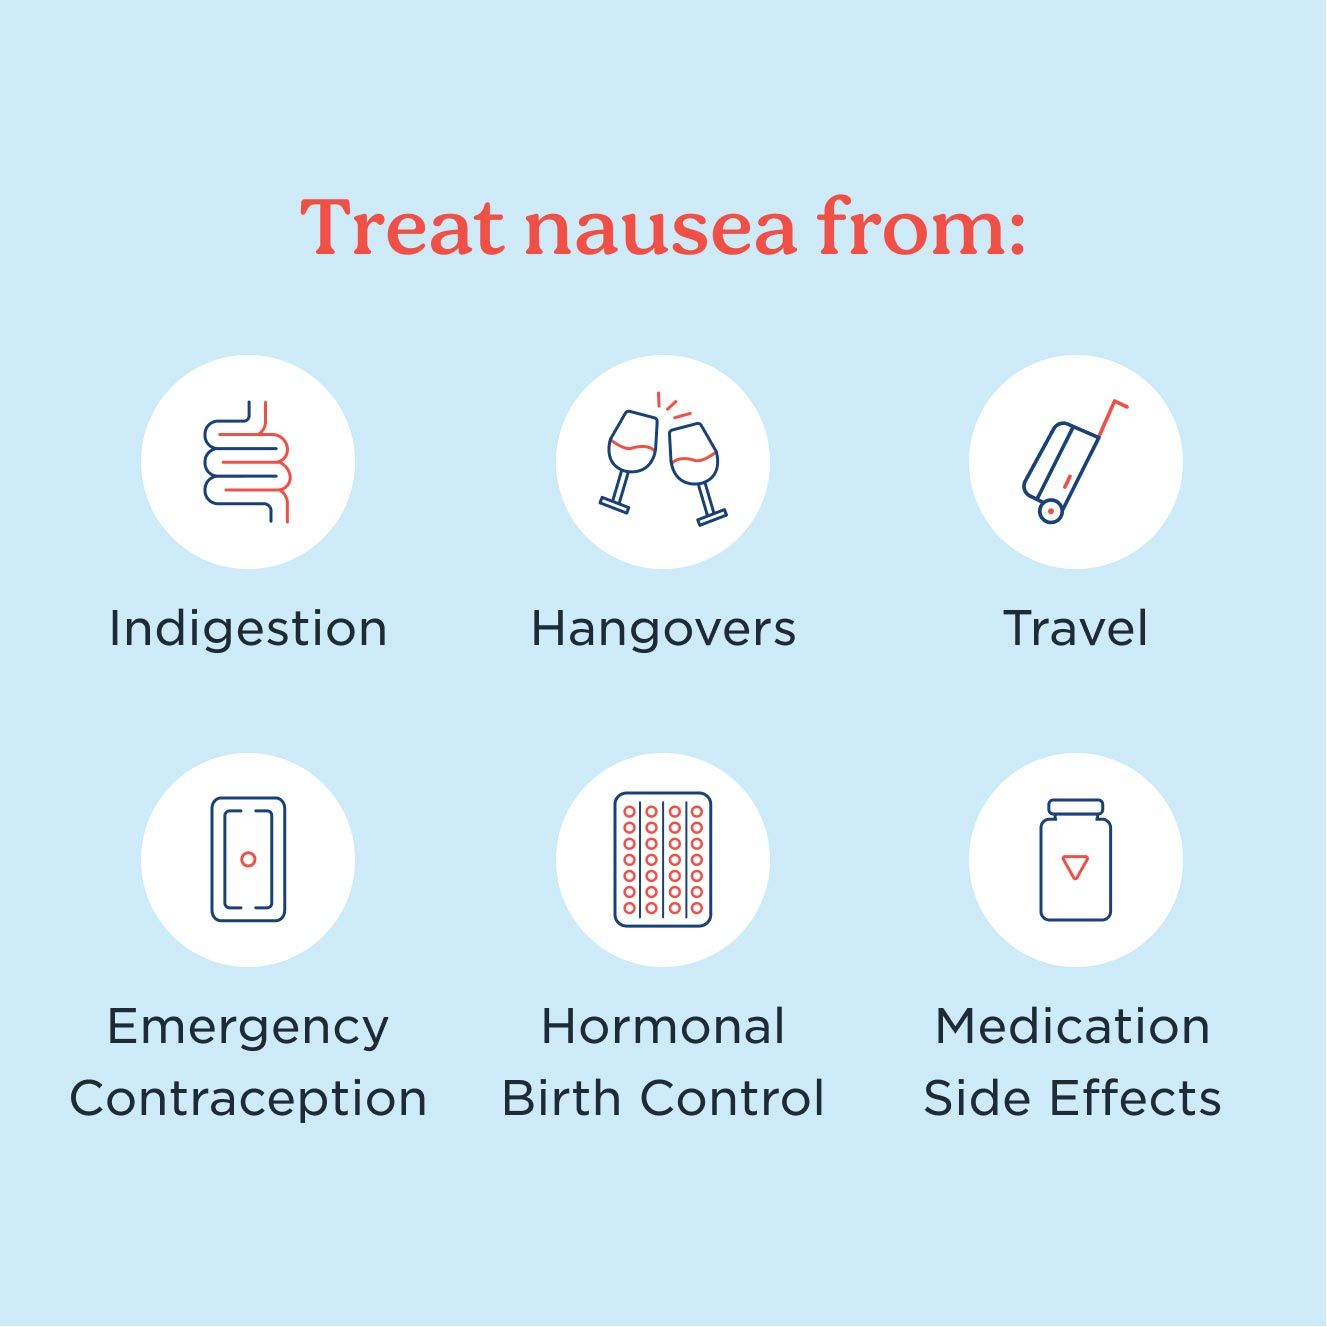 graphic showing Zofran can treat nausea from indigestion, hangovers, travel, emergency contraception, hormonal birth control, and medication side effects